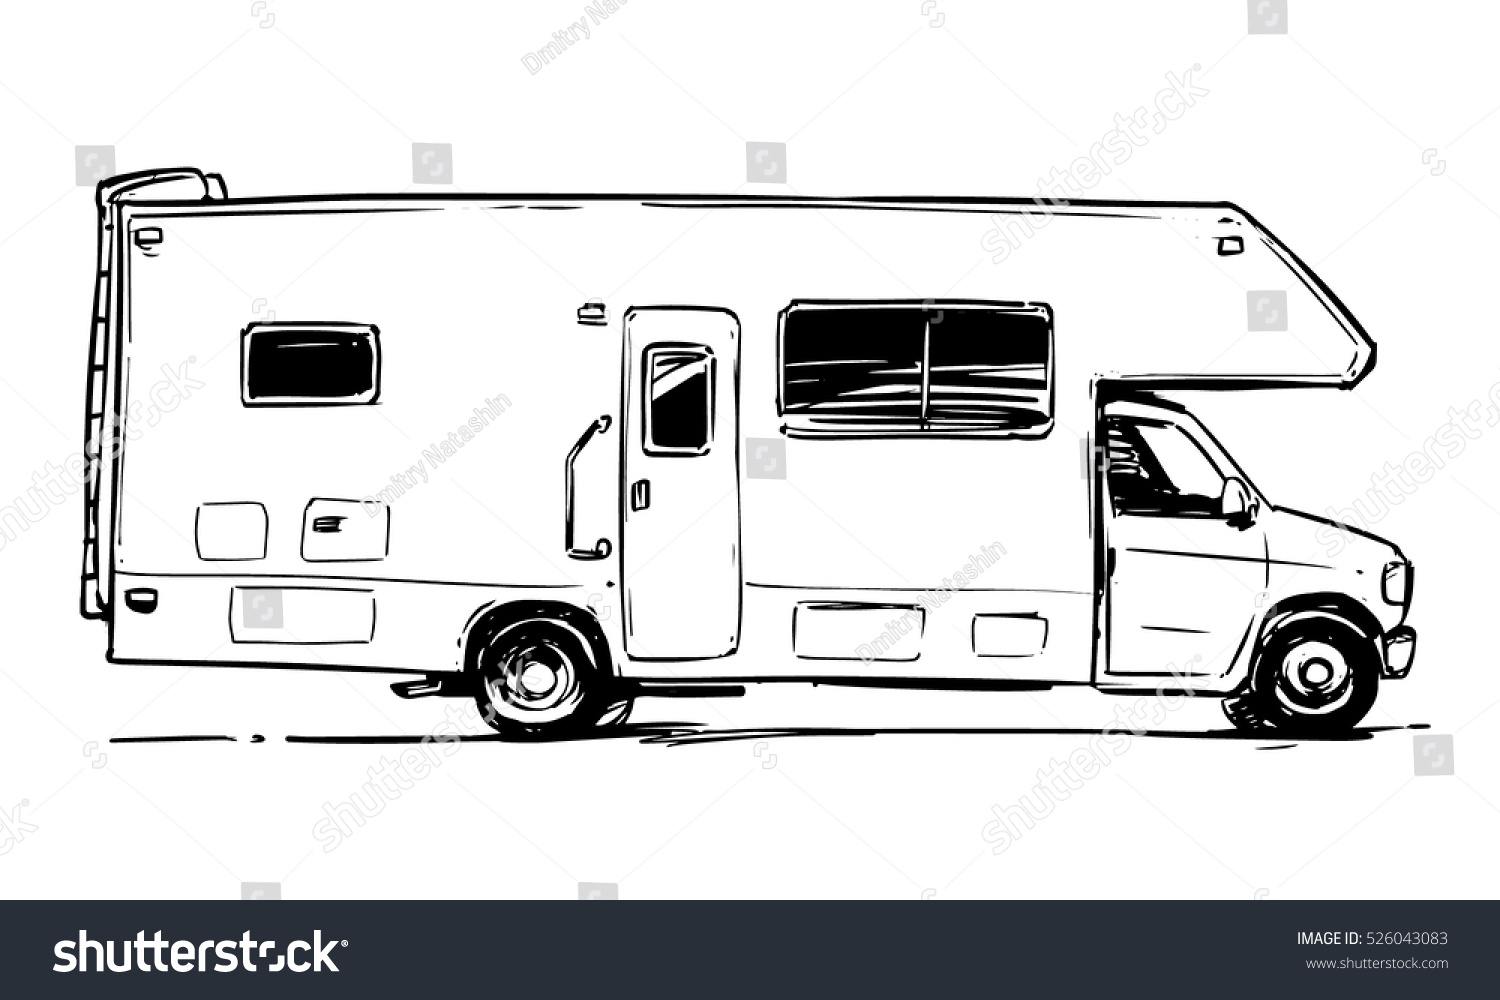 Motorhome Sketch at Explore collection of